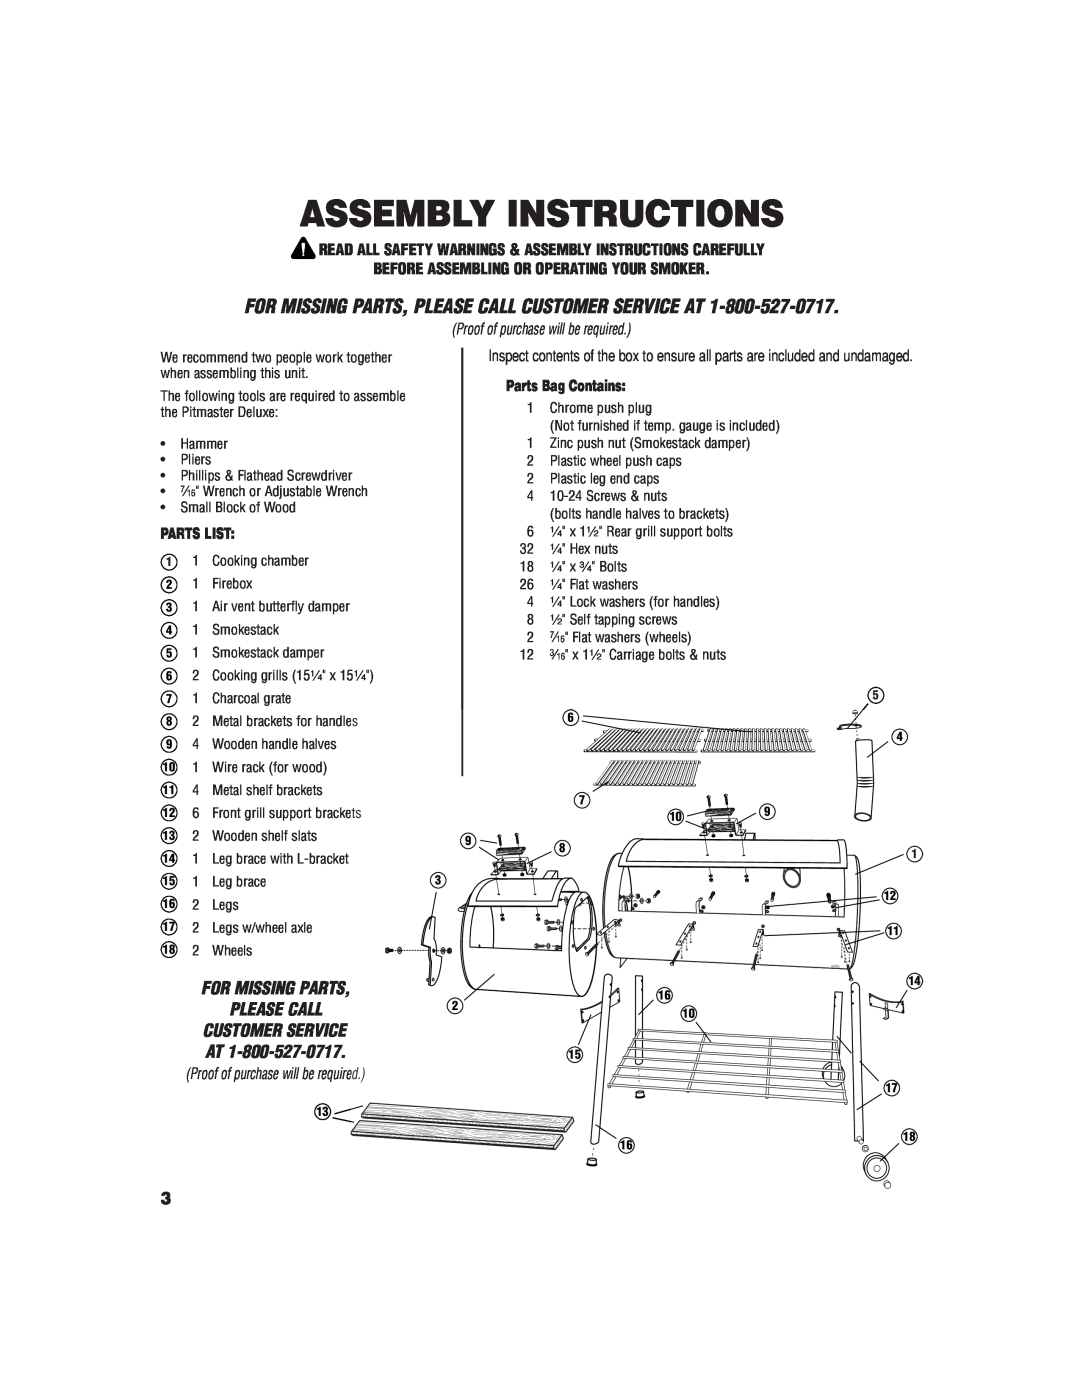 Brinkmann Charcoal/Wood Smoker owner manual Assembly Instructions, Parts List, Parts Bag Contains, 15 1 Leg brace 